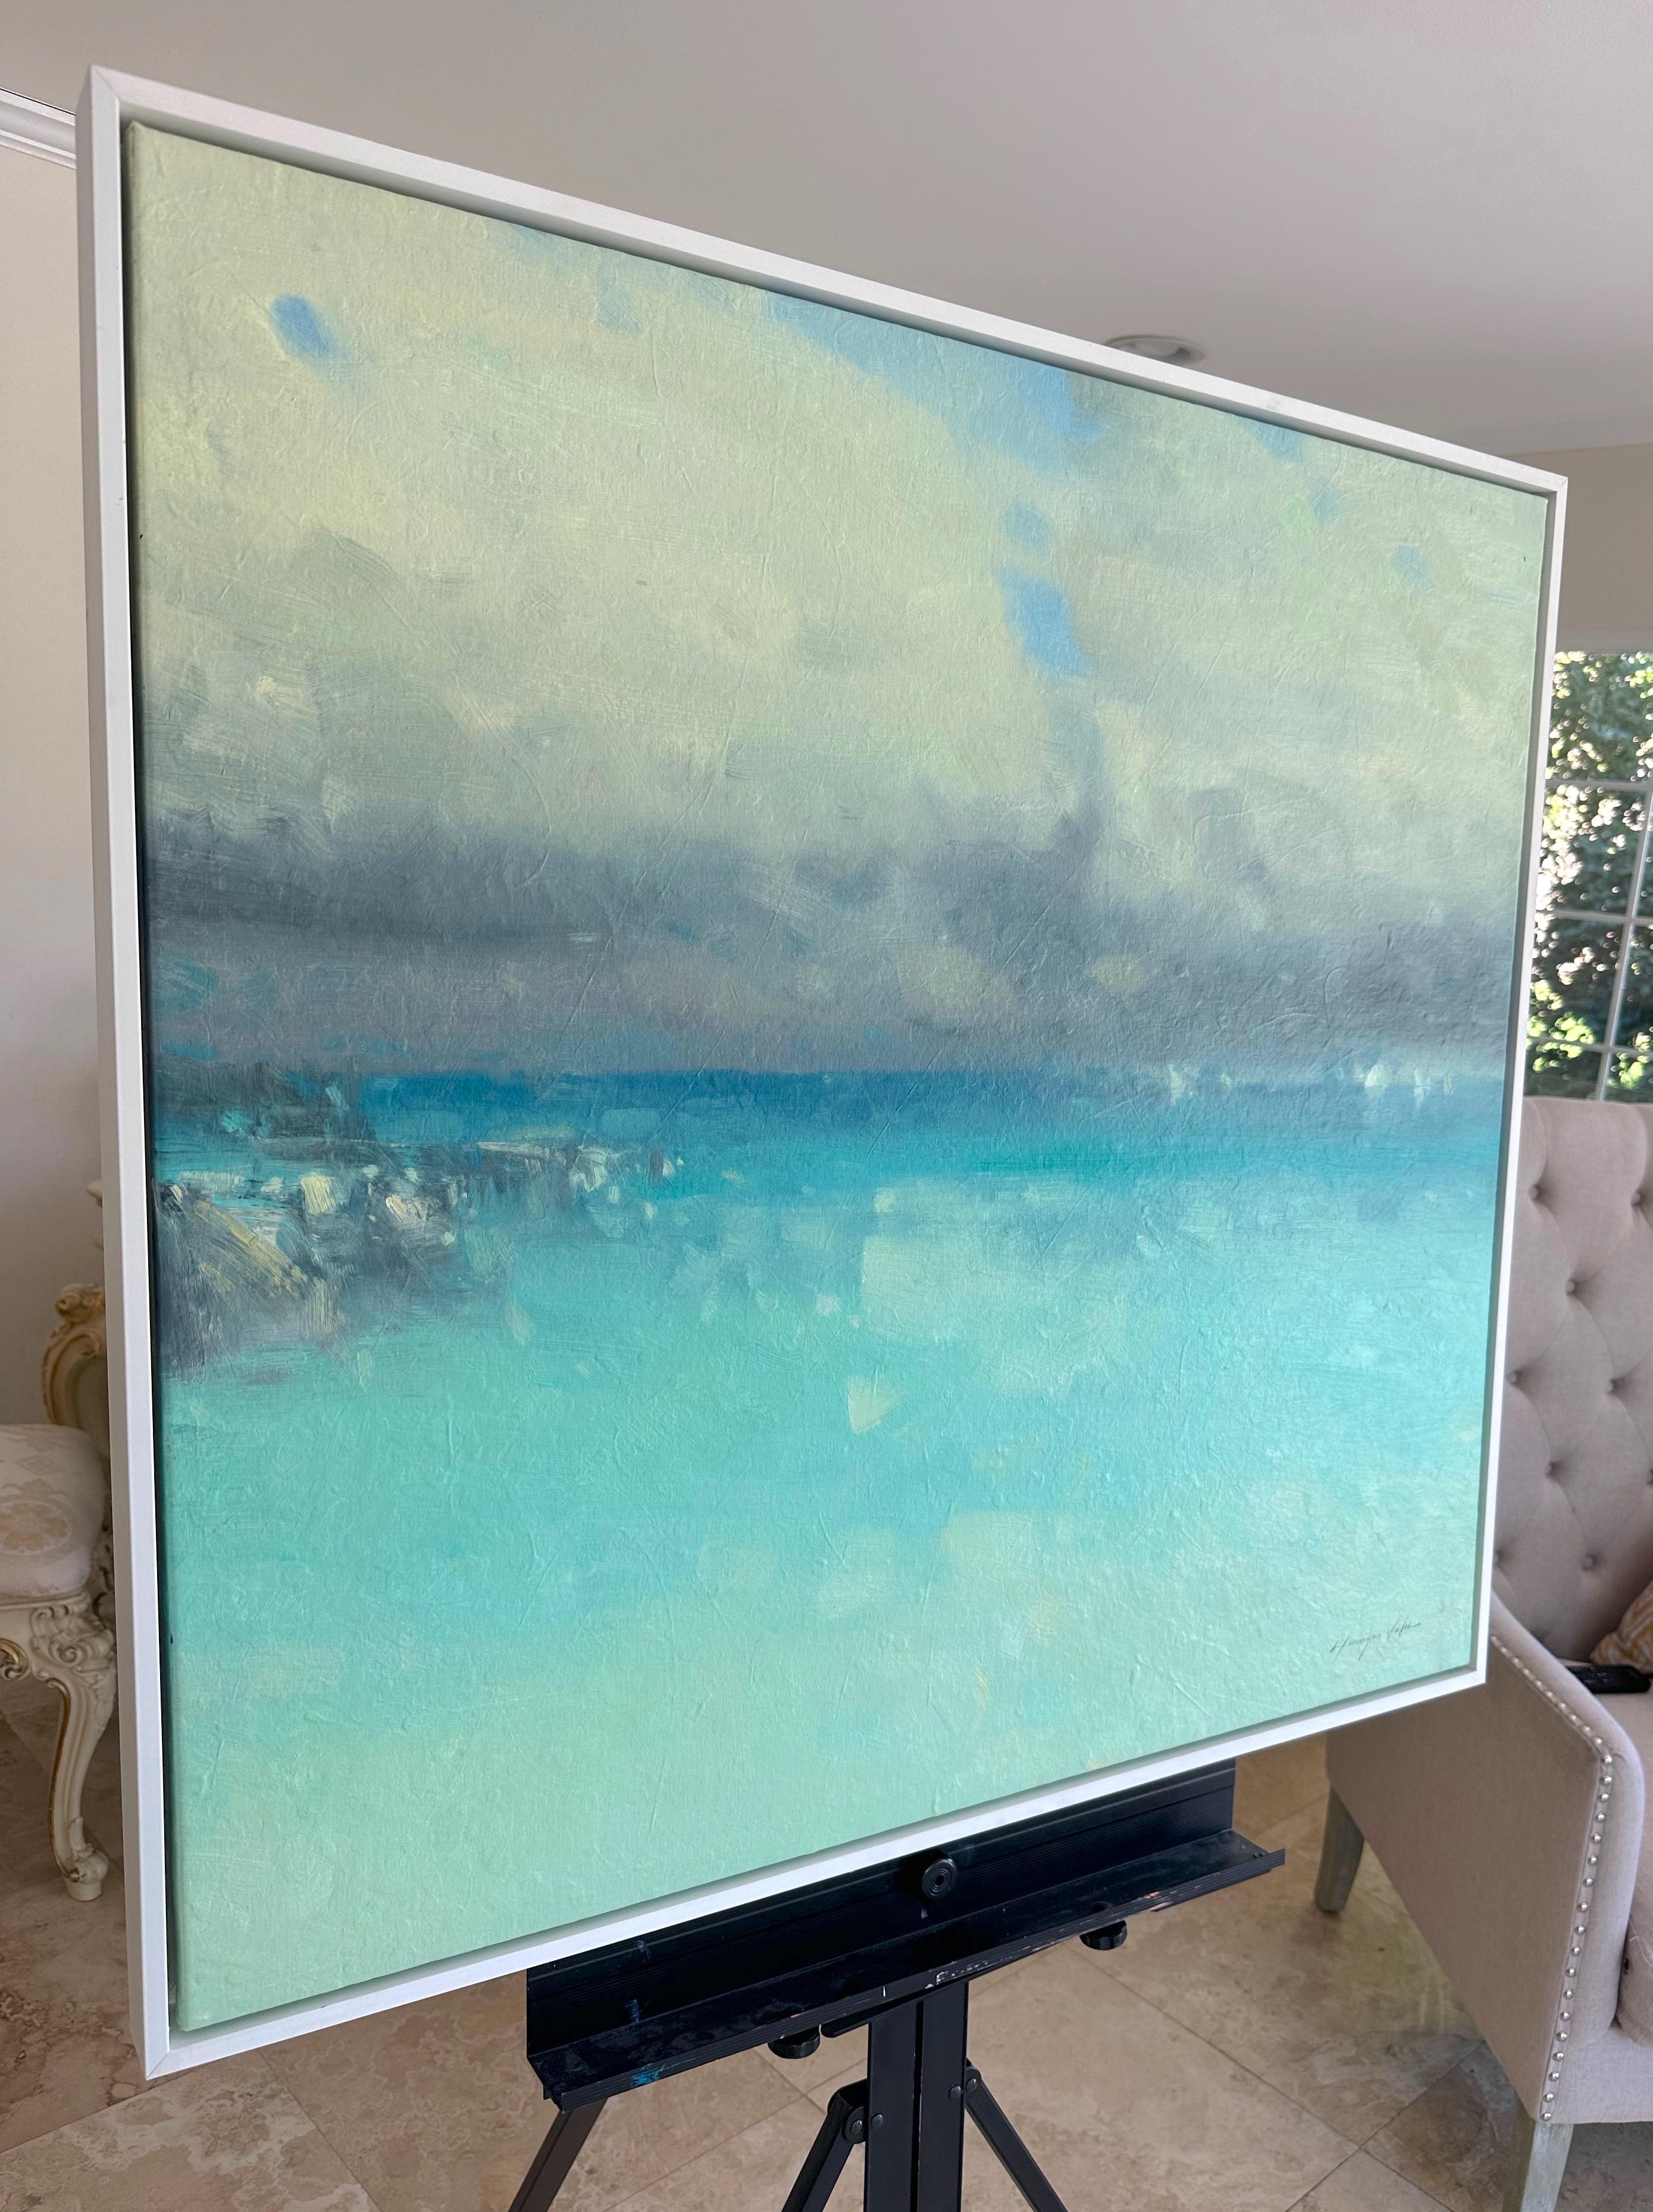 Artist: Vahe Yeremyan 
Work: Original Oil Painting, Handmade Artwork, One of a Kind 
Medium: Oil on Canvas 
Year: 2022
Style: Impressionism, 
Subject: Pacific Highway,
Size: 37